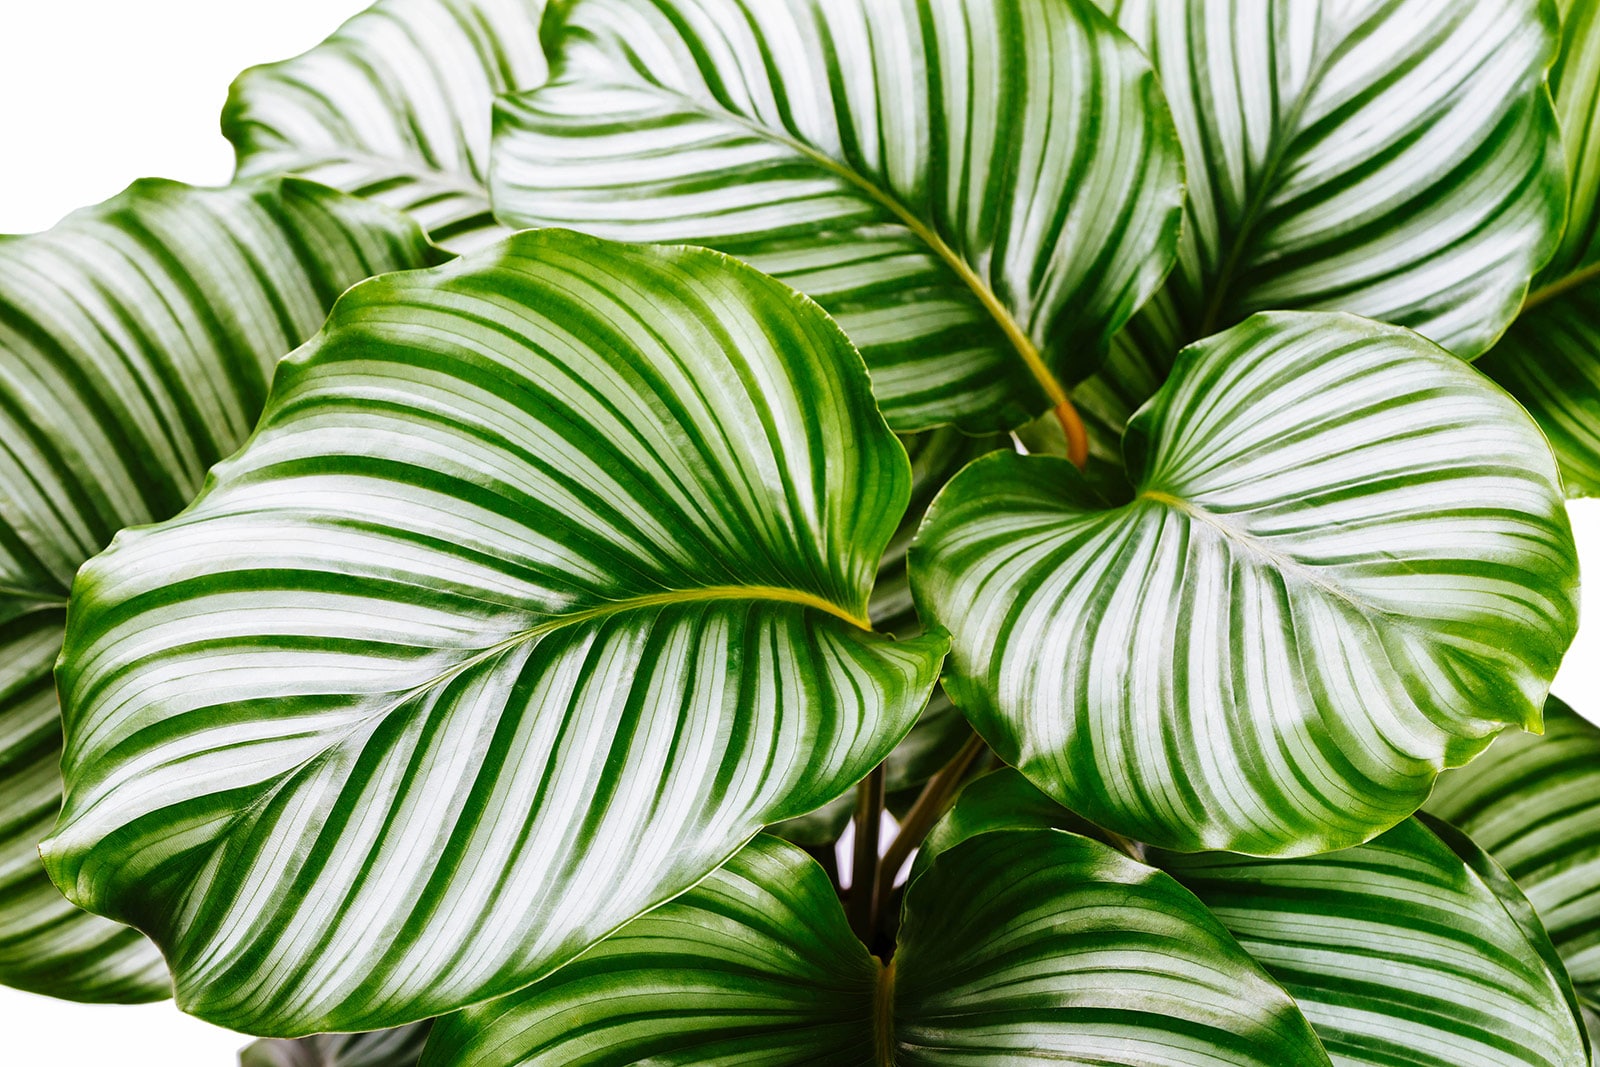 A full Calathea orbifolia prayer plant with large, green and white striped leaves